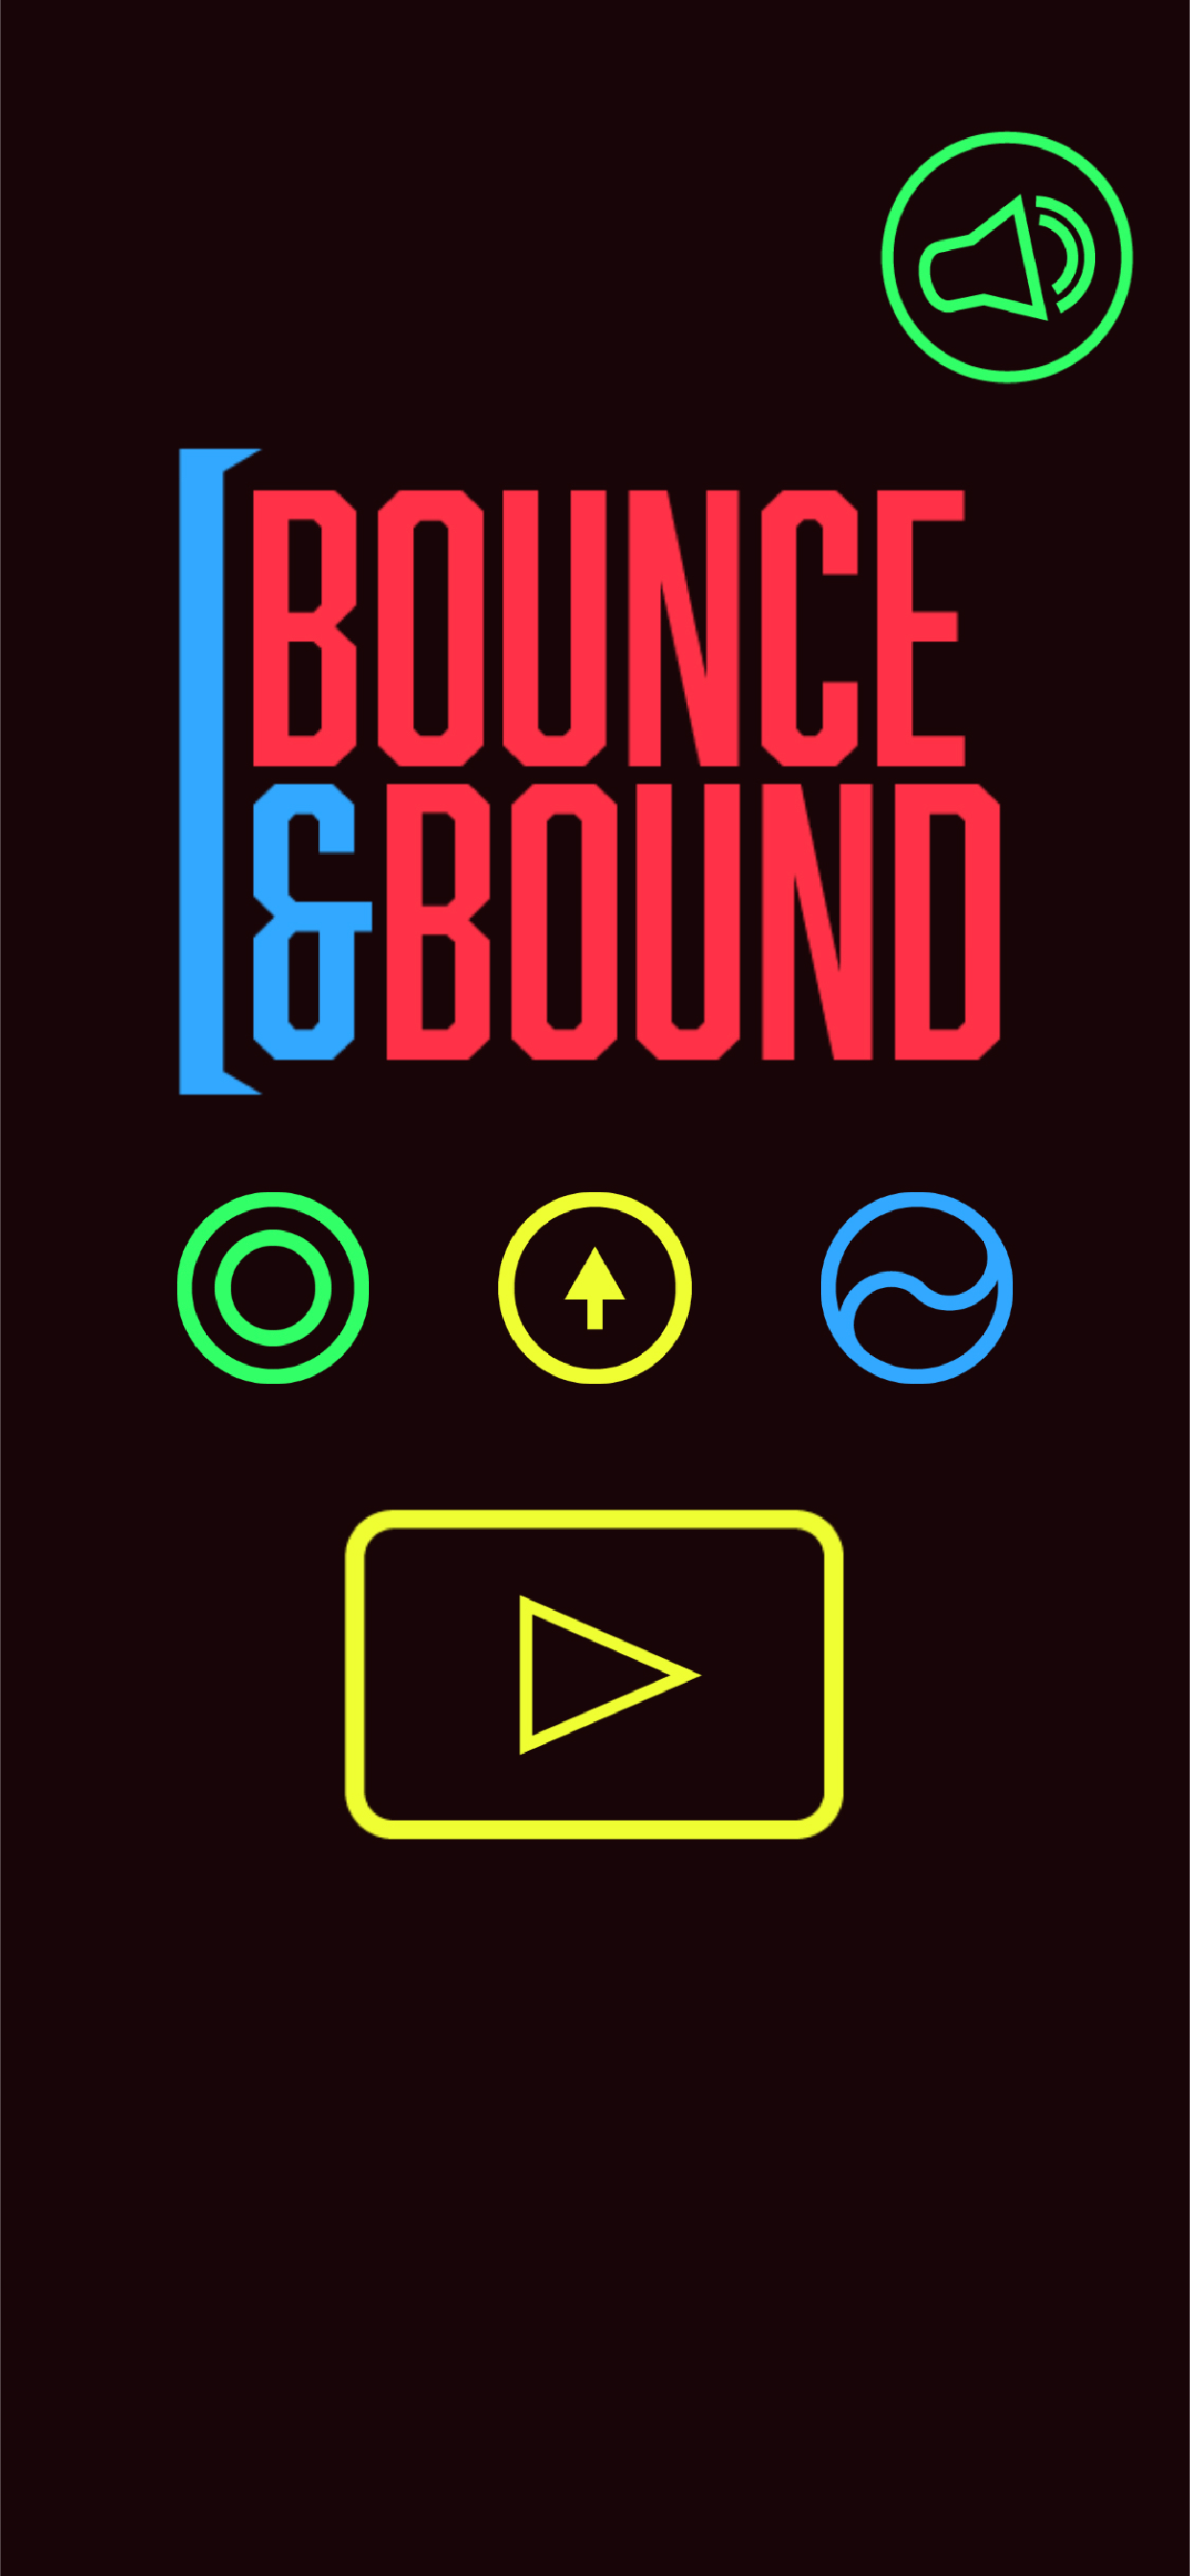 Bounce and Bound app screenshot